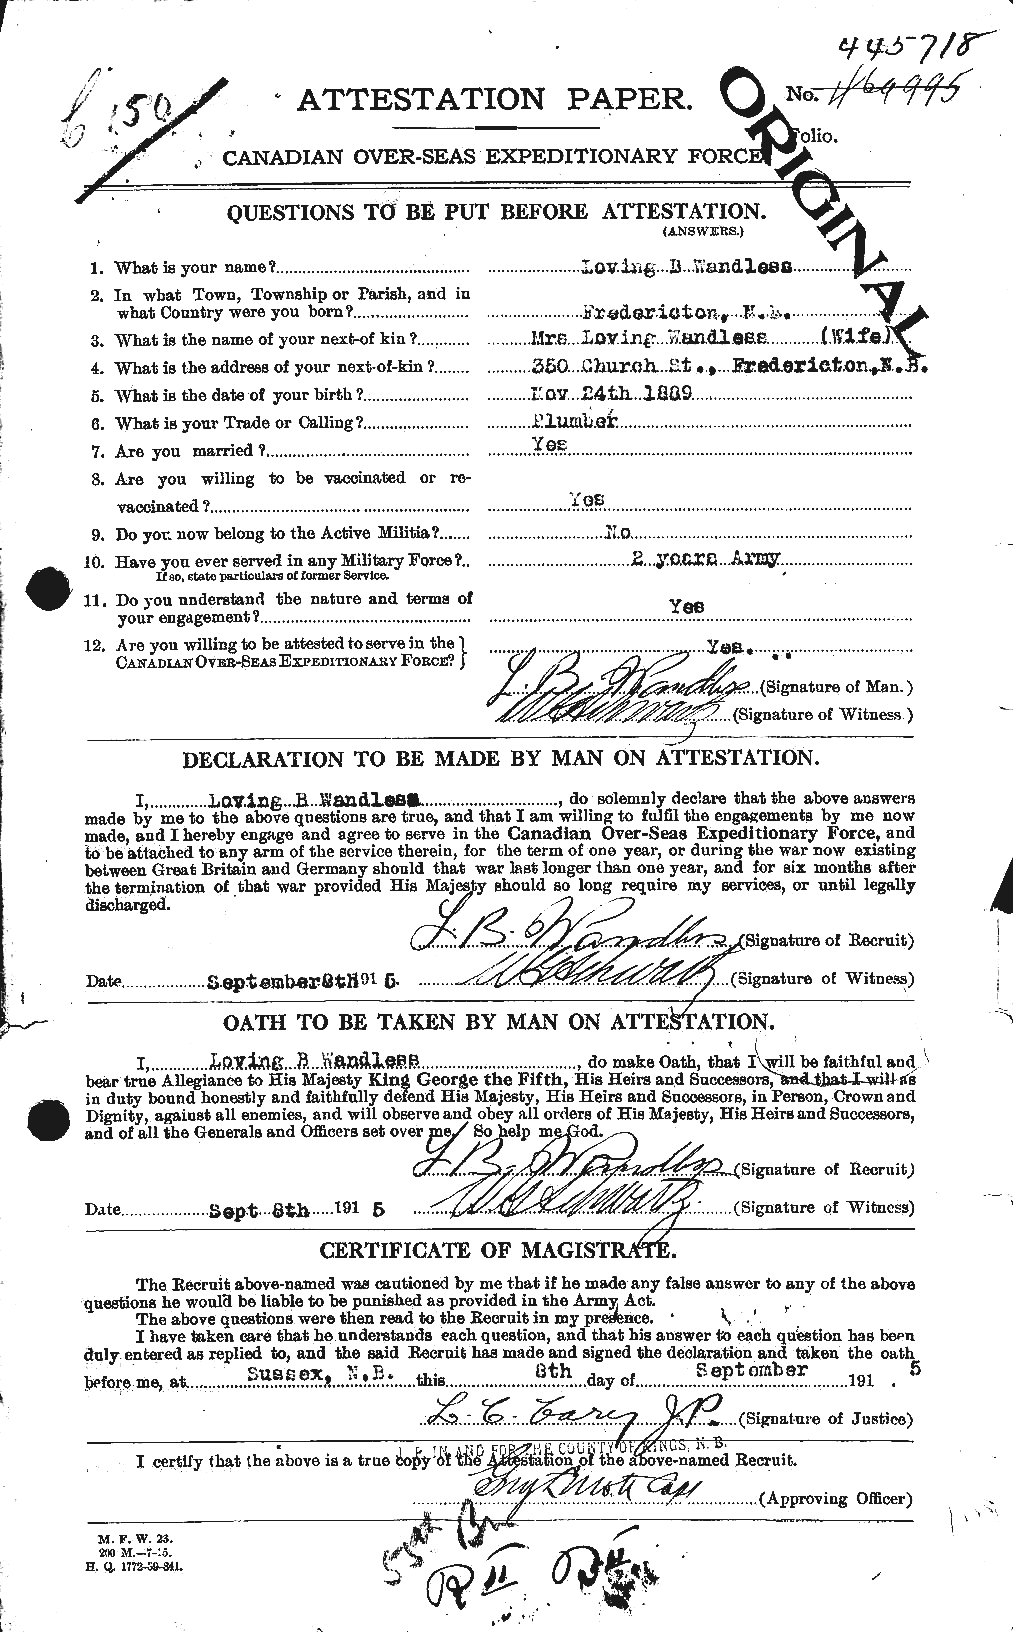 Personnel Records of the First World War - CEF 654932a